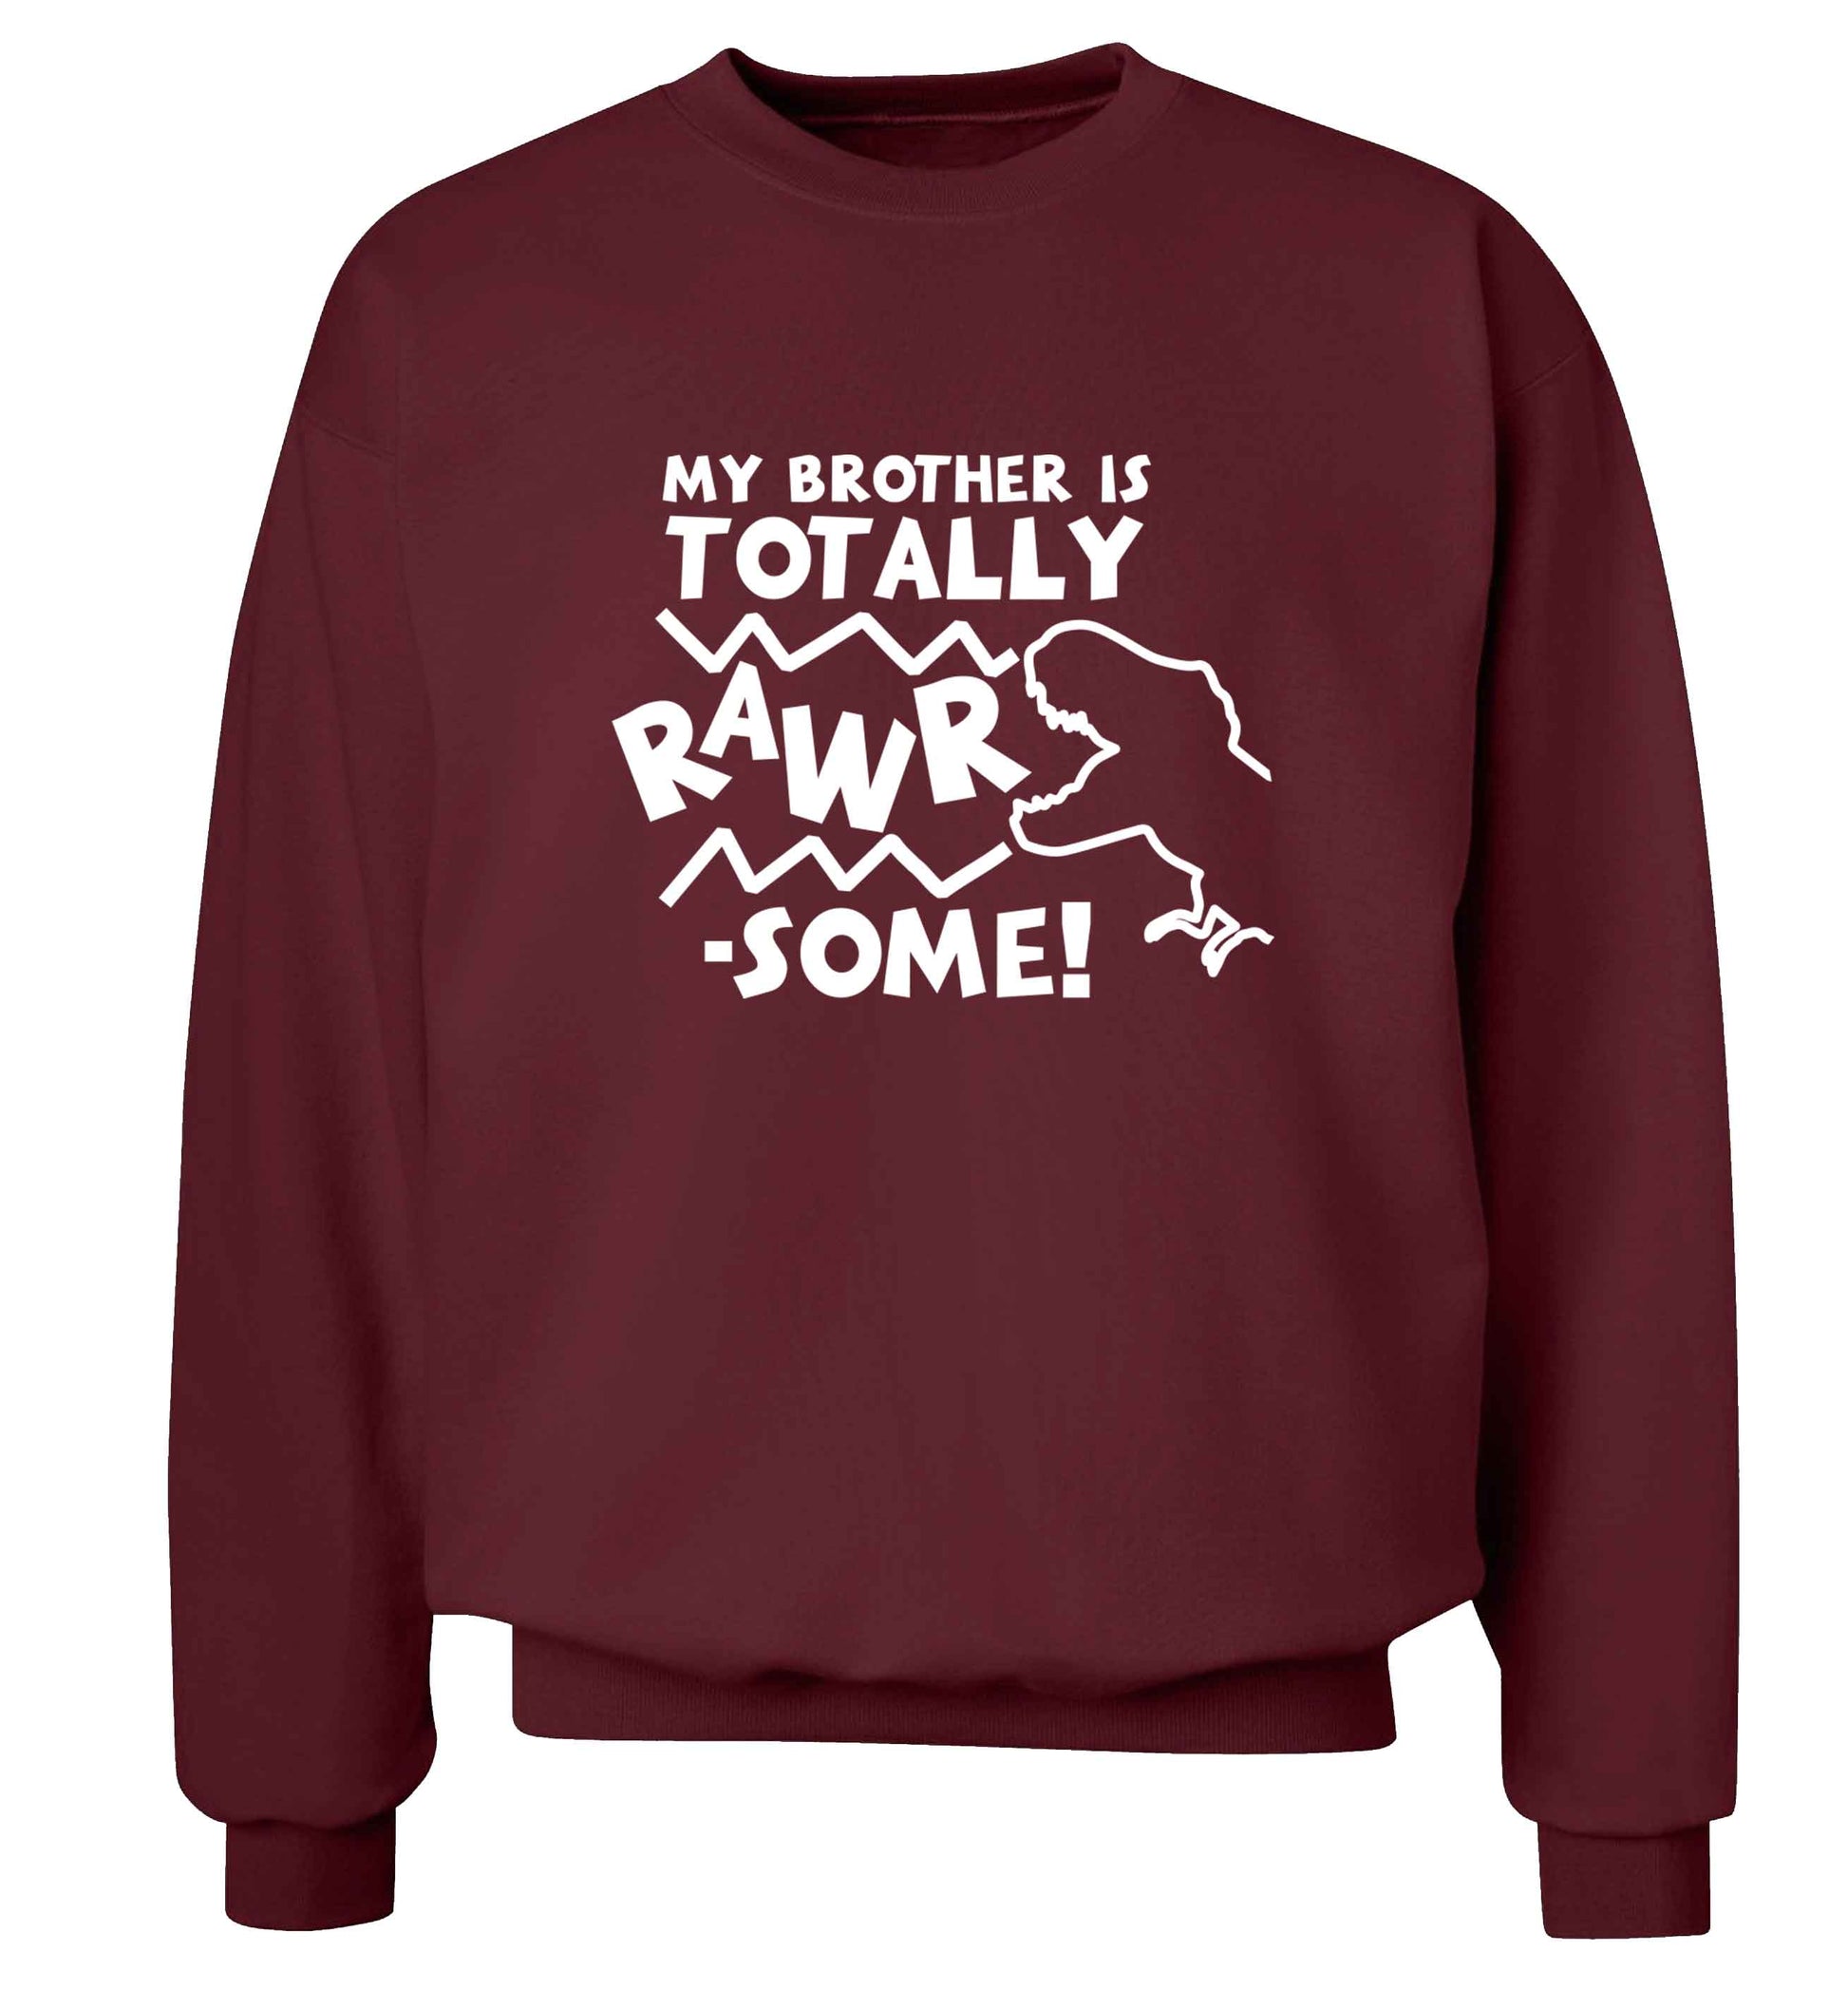 My brother is totally rawrsome adult's unisex maroon sweater 2XL